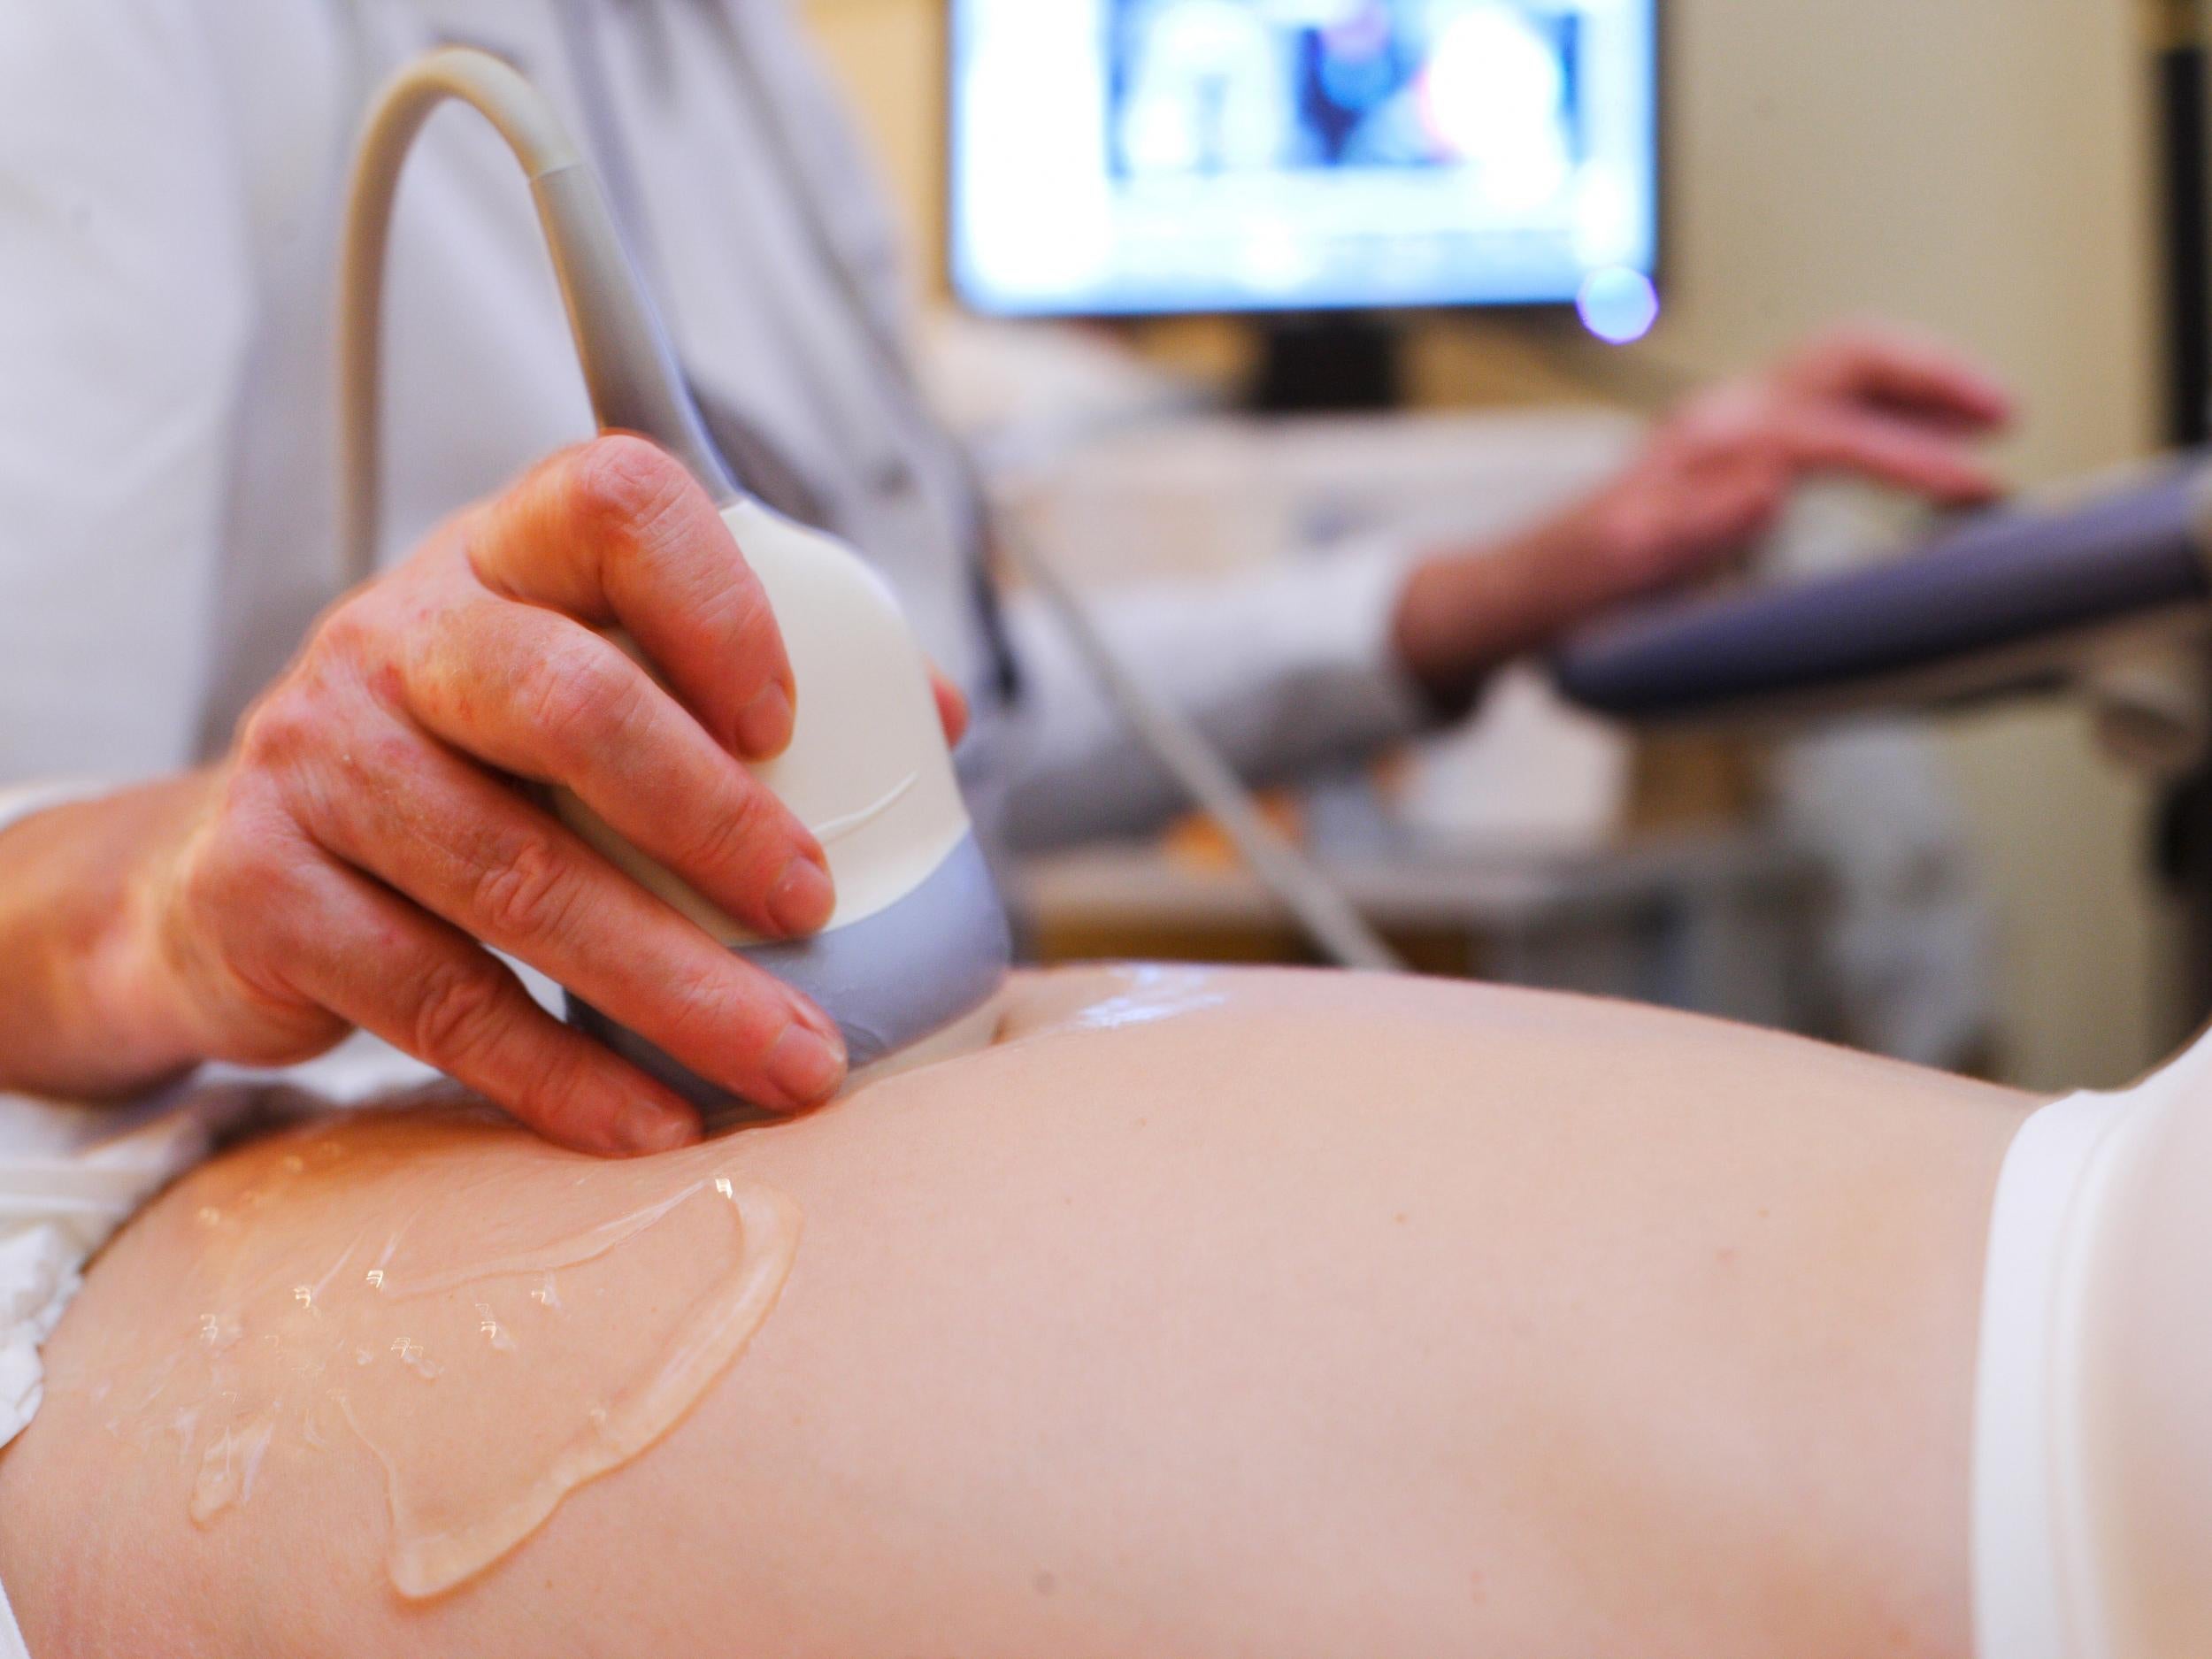 UK is one of few European countries not to offer a late-term ultrasound scan